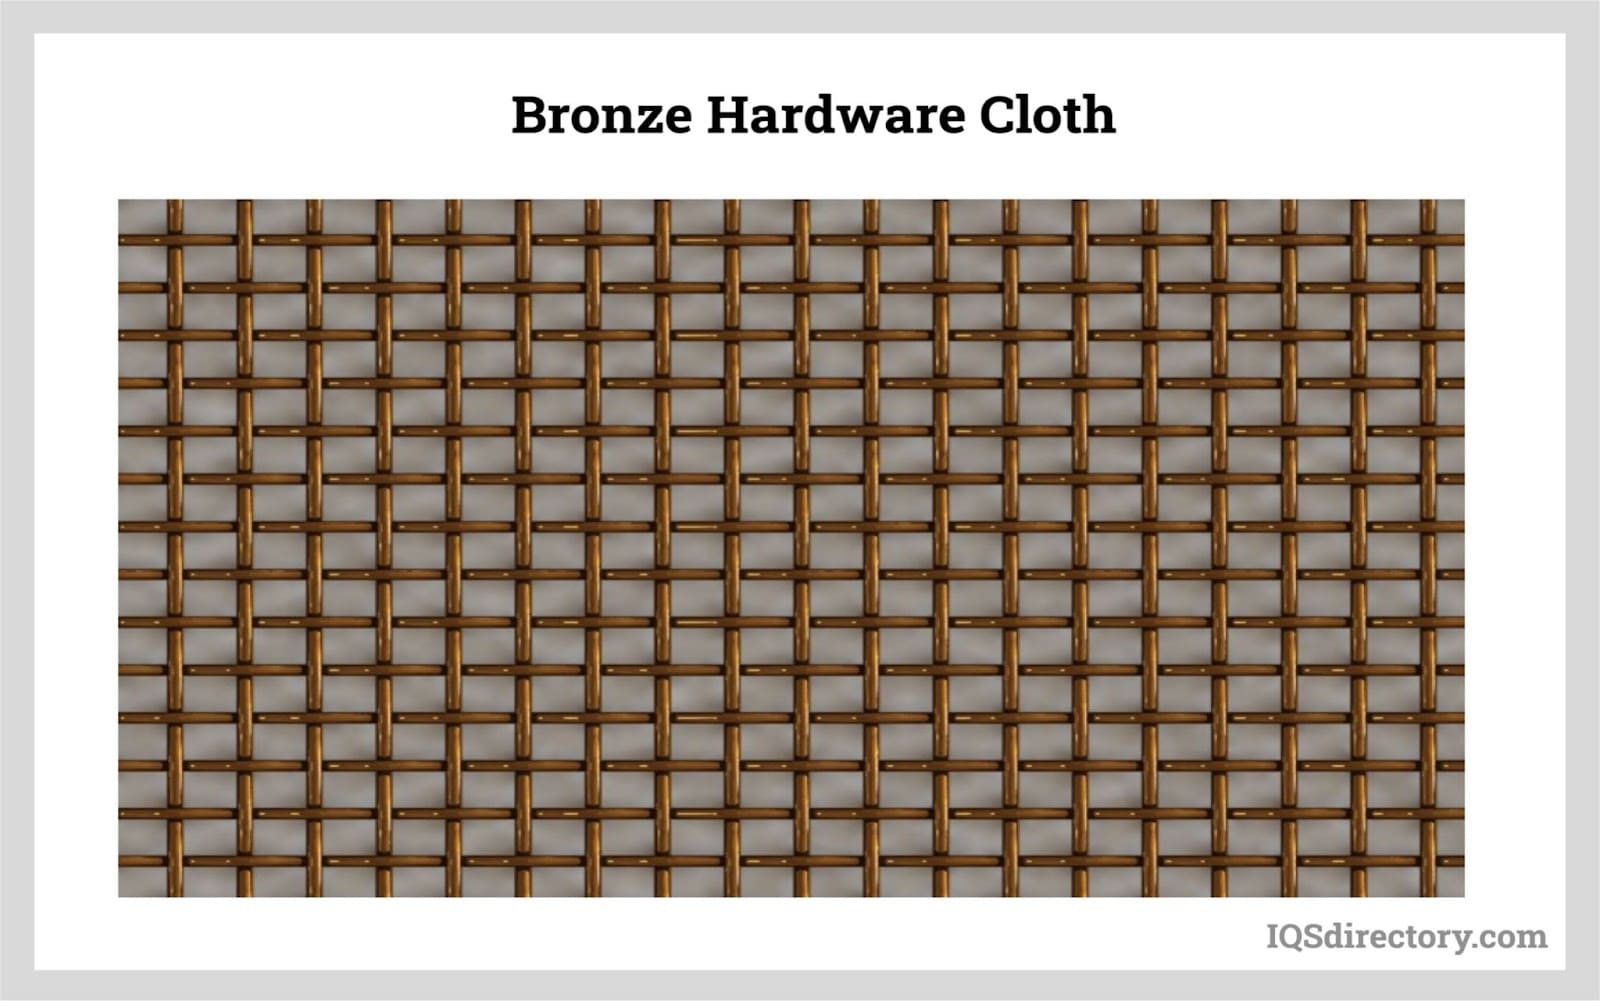 Hardware Cloth: What Is It? How Is It Made? Types, Uses